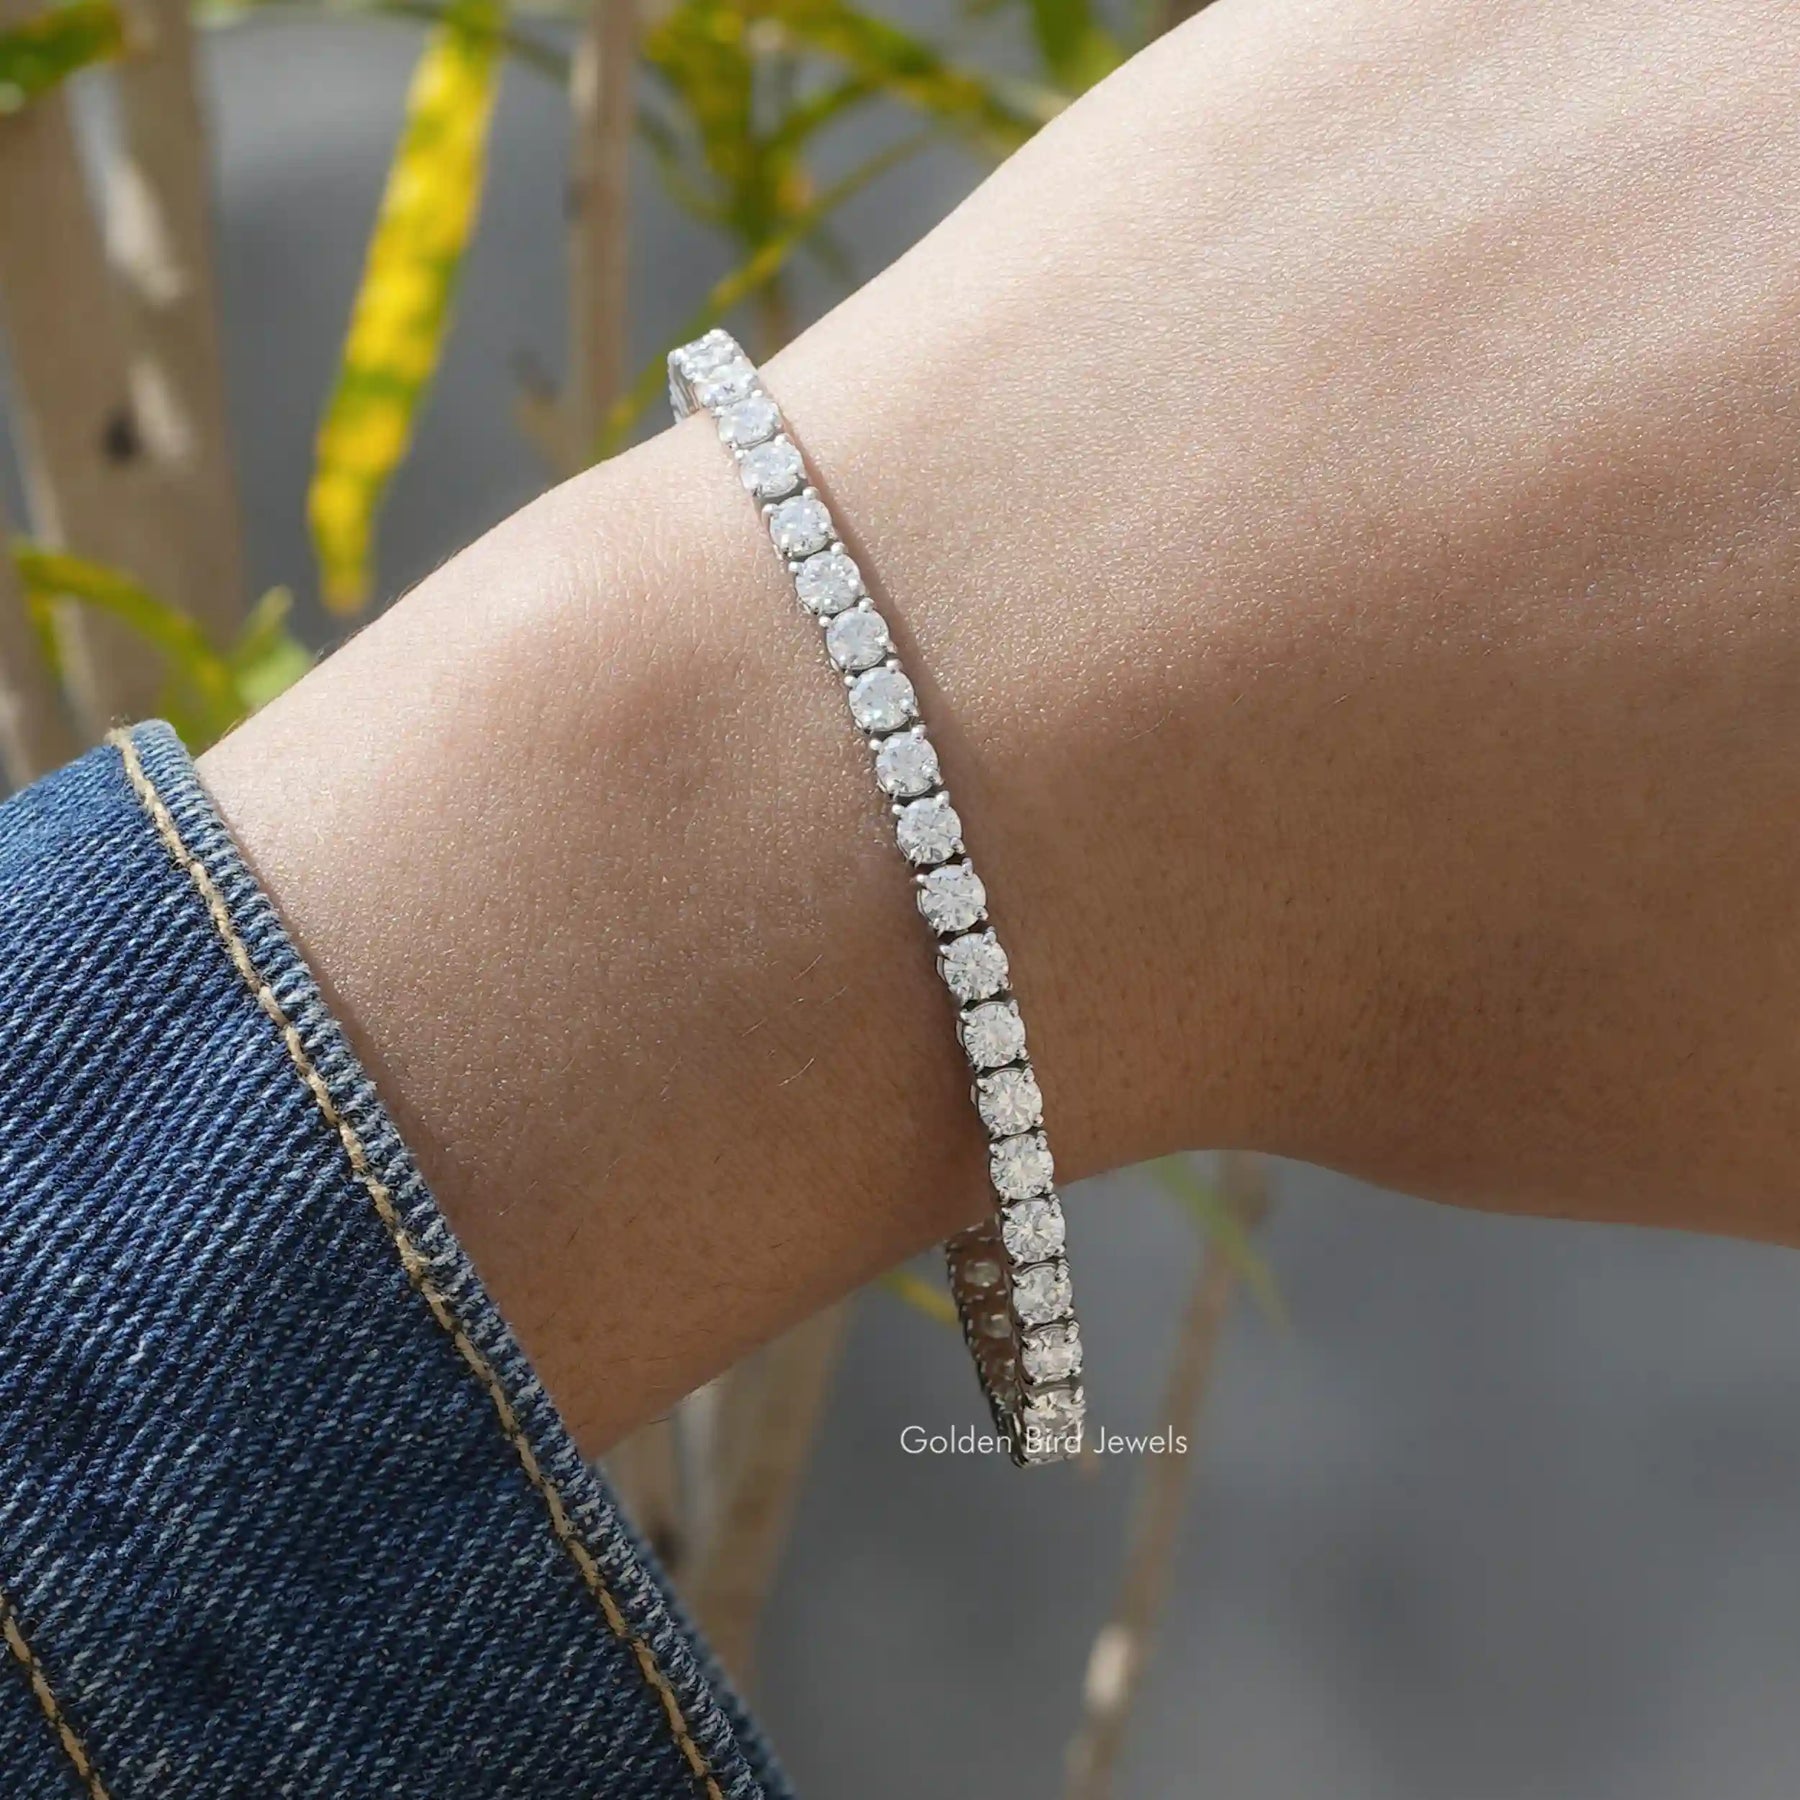 [Front view of moissanite round cut tennis bracelet made of white gold]-[Golden Bird Jewels]